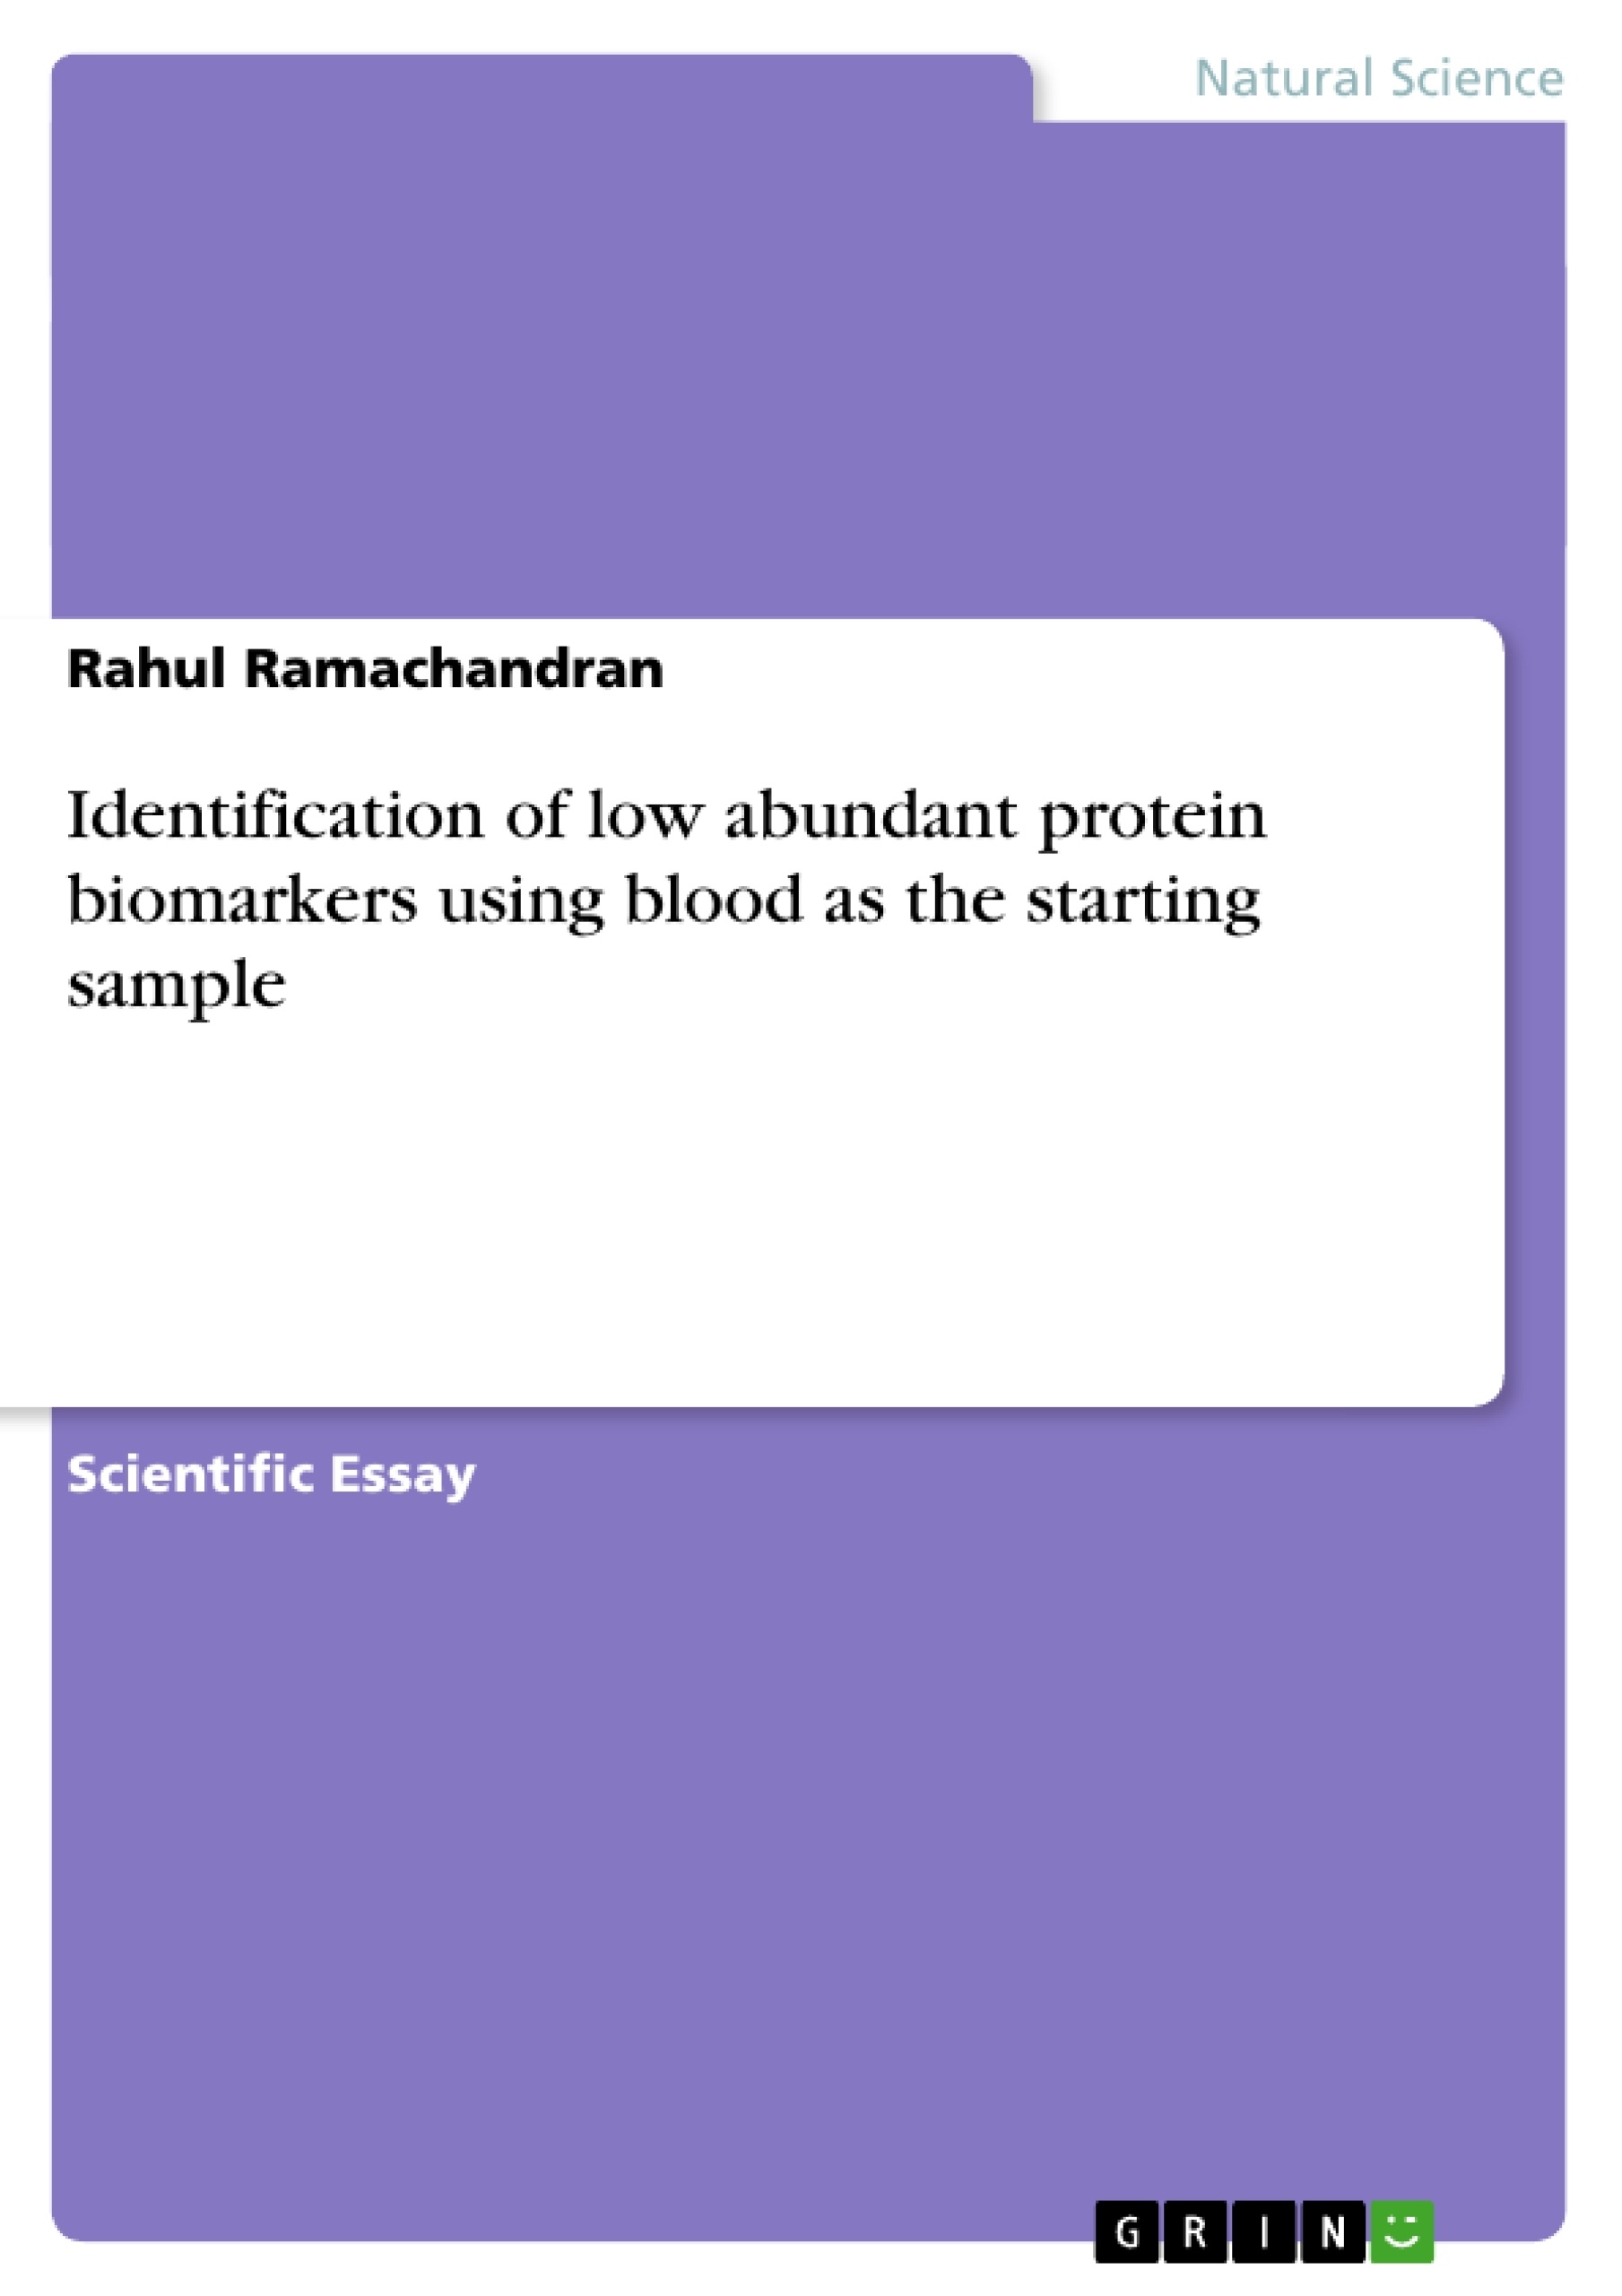 Title: Identification of low abundant protein biomarkers using blood as the starting sample